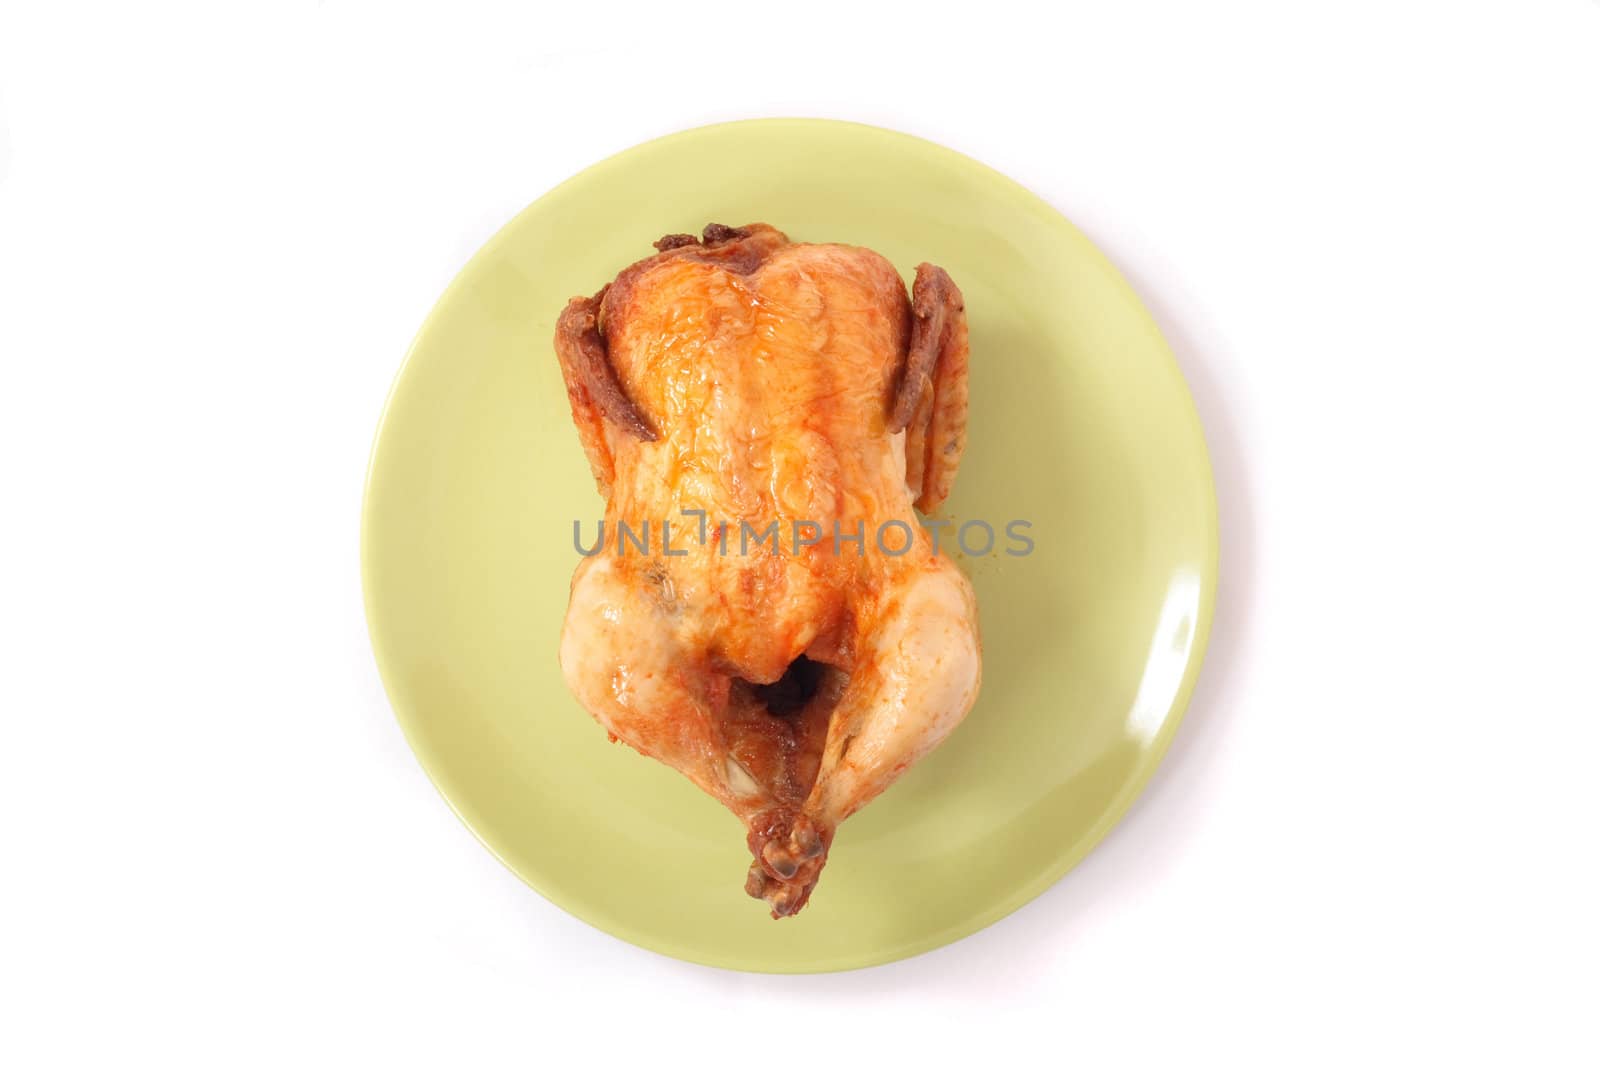 chicken on the green plate on the white background